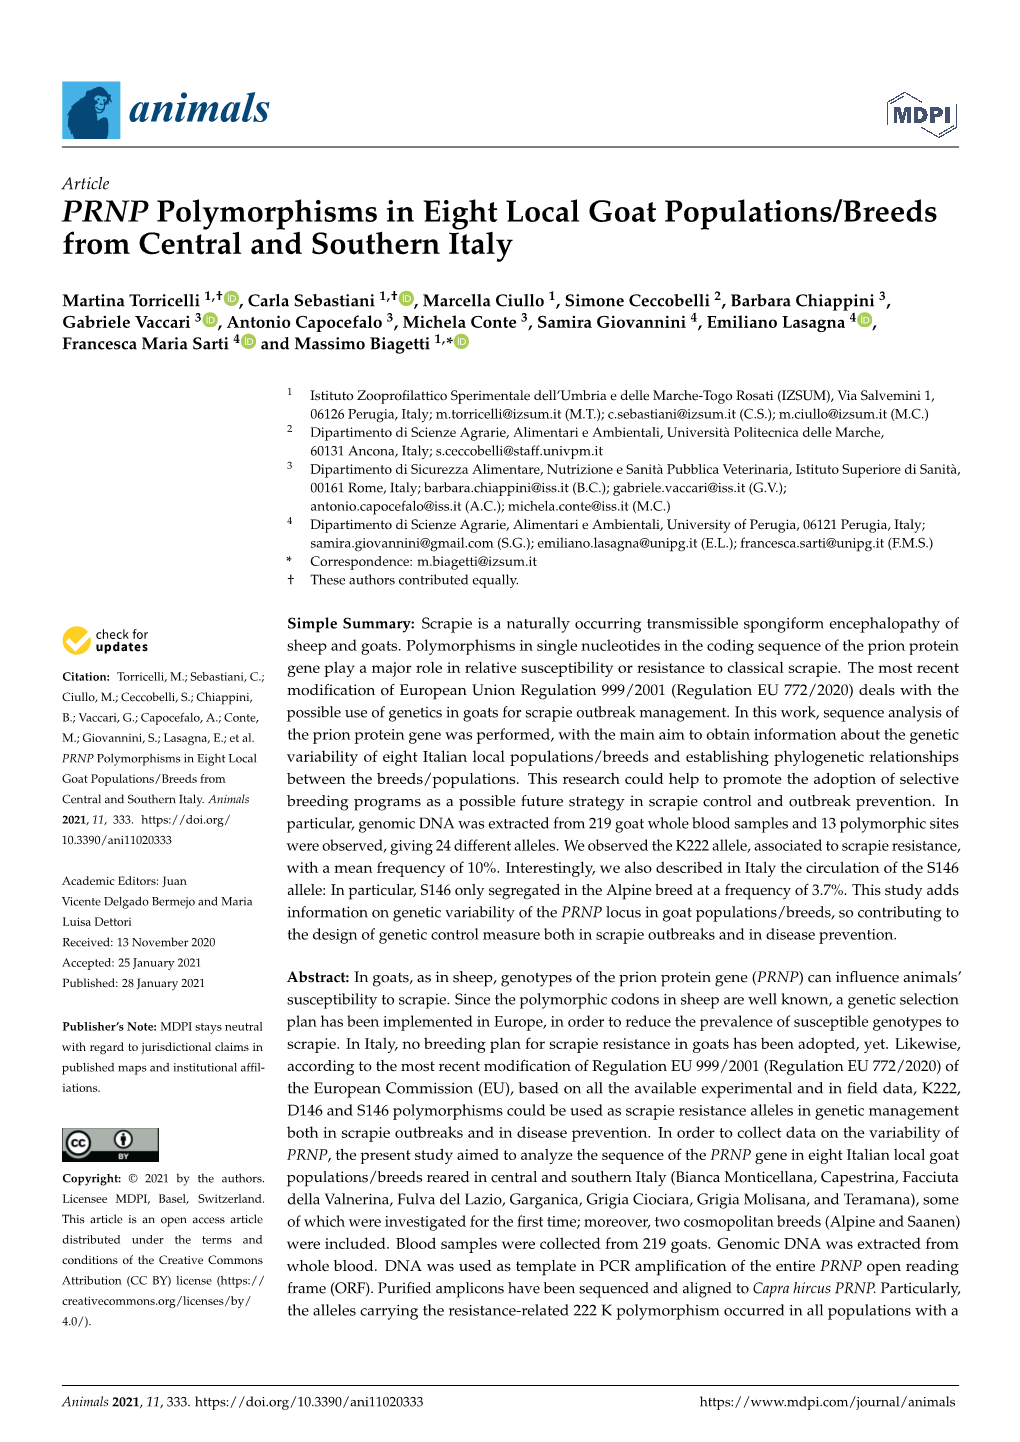 PRNP Polymorphisms in Eight Local Goat Populations/Breeds from Central and Southern Italy